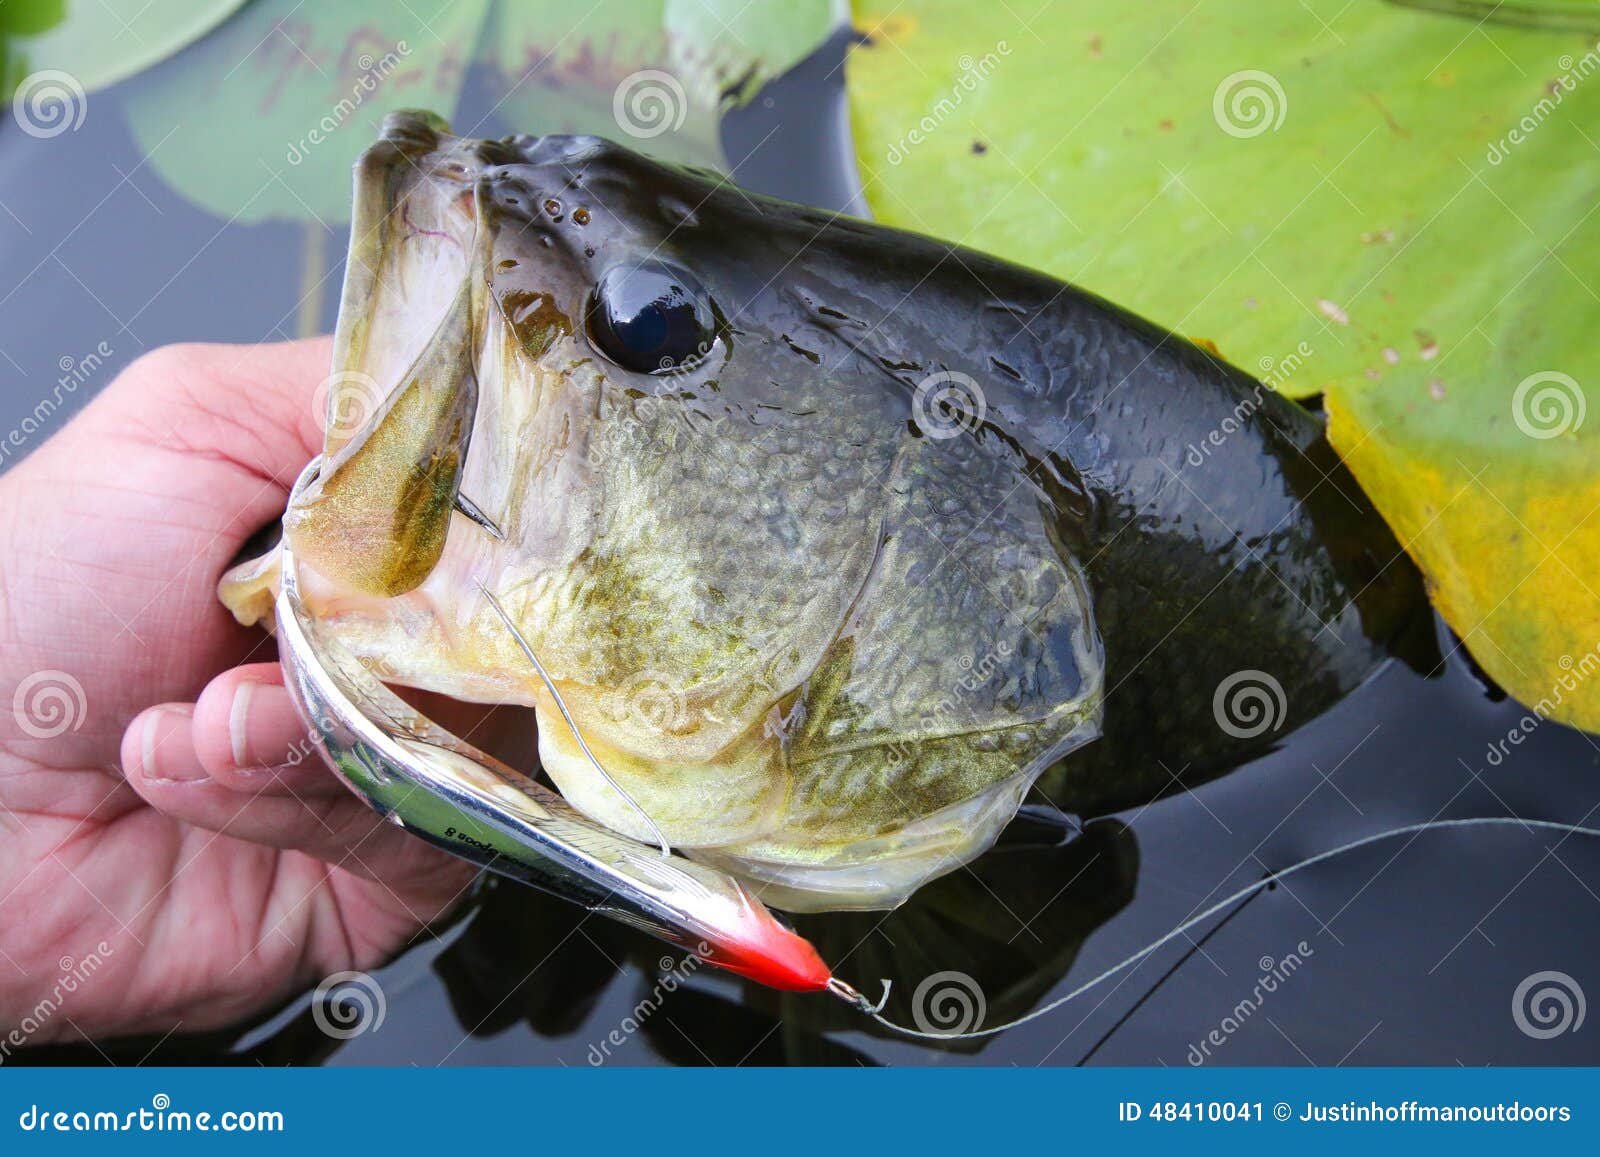 Large Mouth Bass Fishing Spoon Lure Stock Image - Image of lily, bait:  48410041